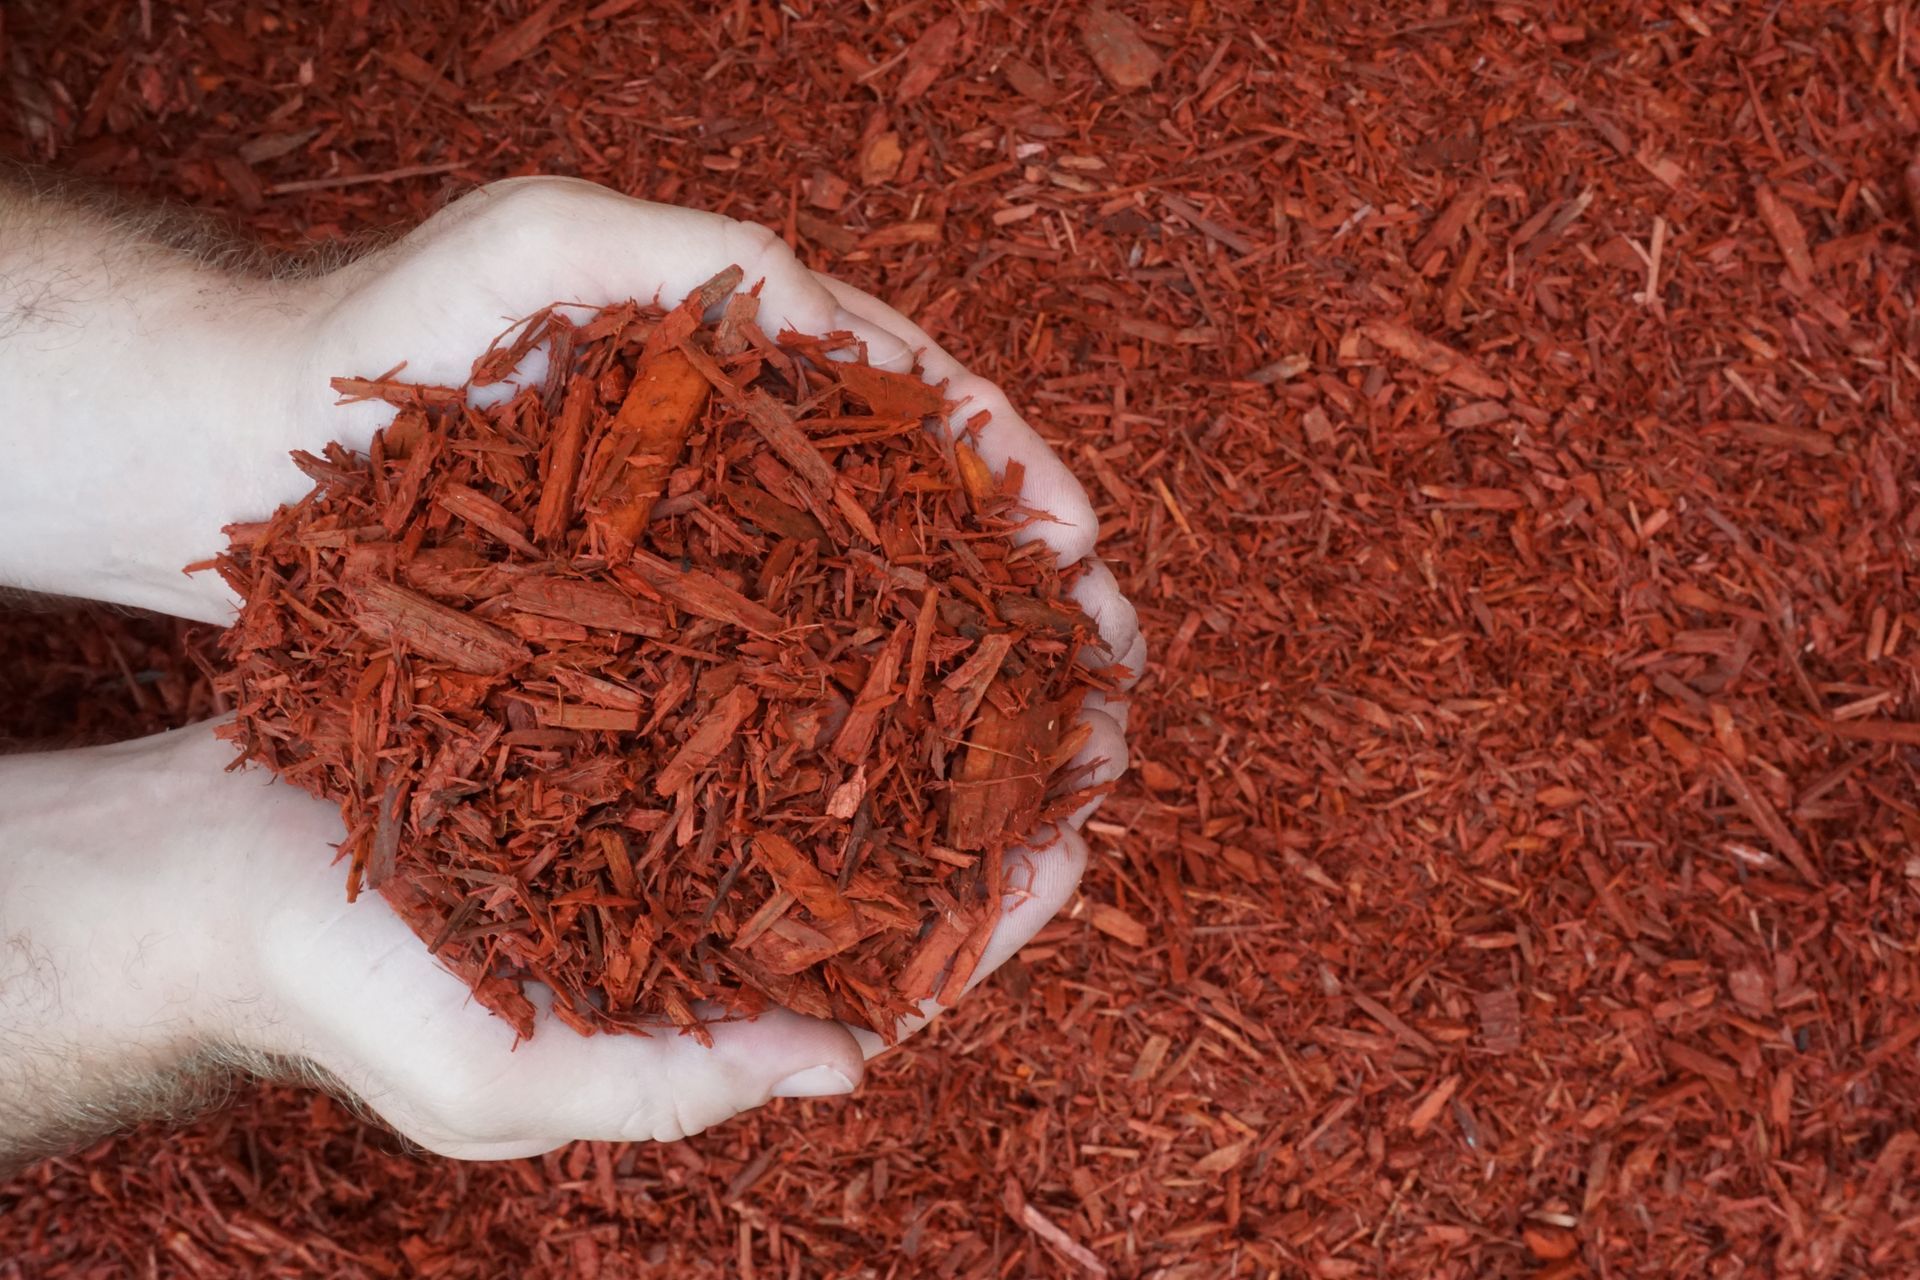 Dyed Country Red Mulch For Sale. Bulk Red Mulch Delivered to Lebanon, Annville, Palmyra, & Cornwall.